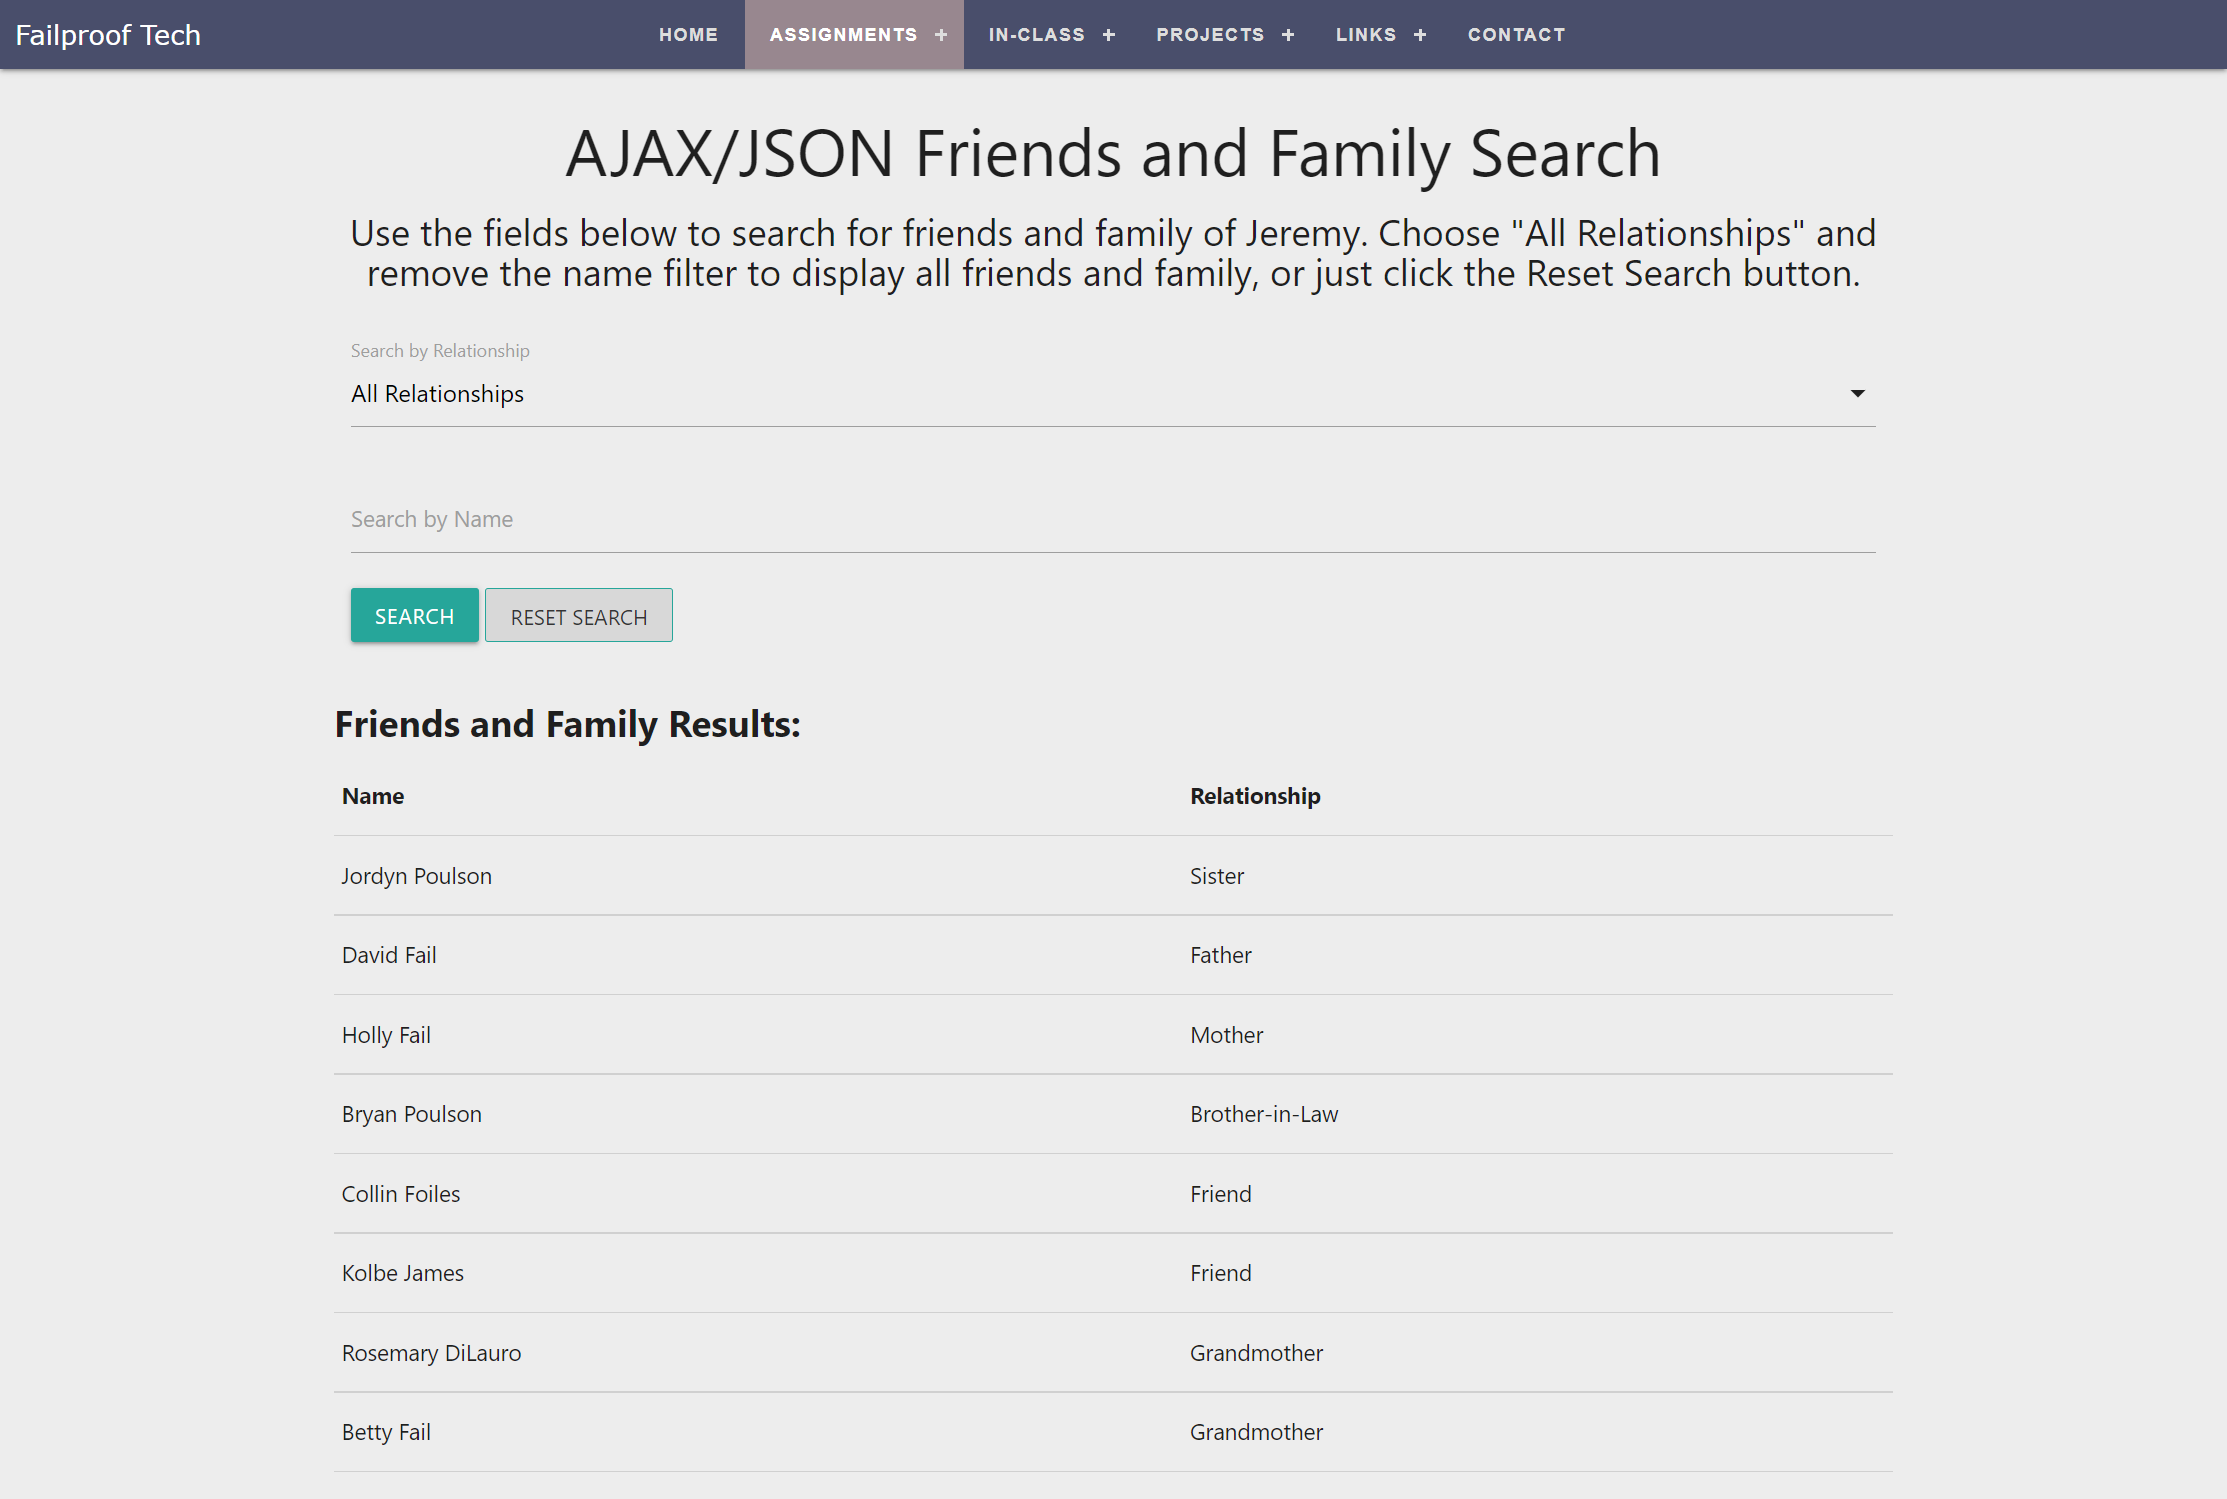 Friends and Family AJAX Search Assignment Screenshot